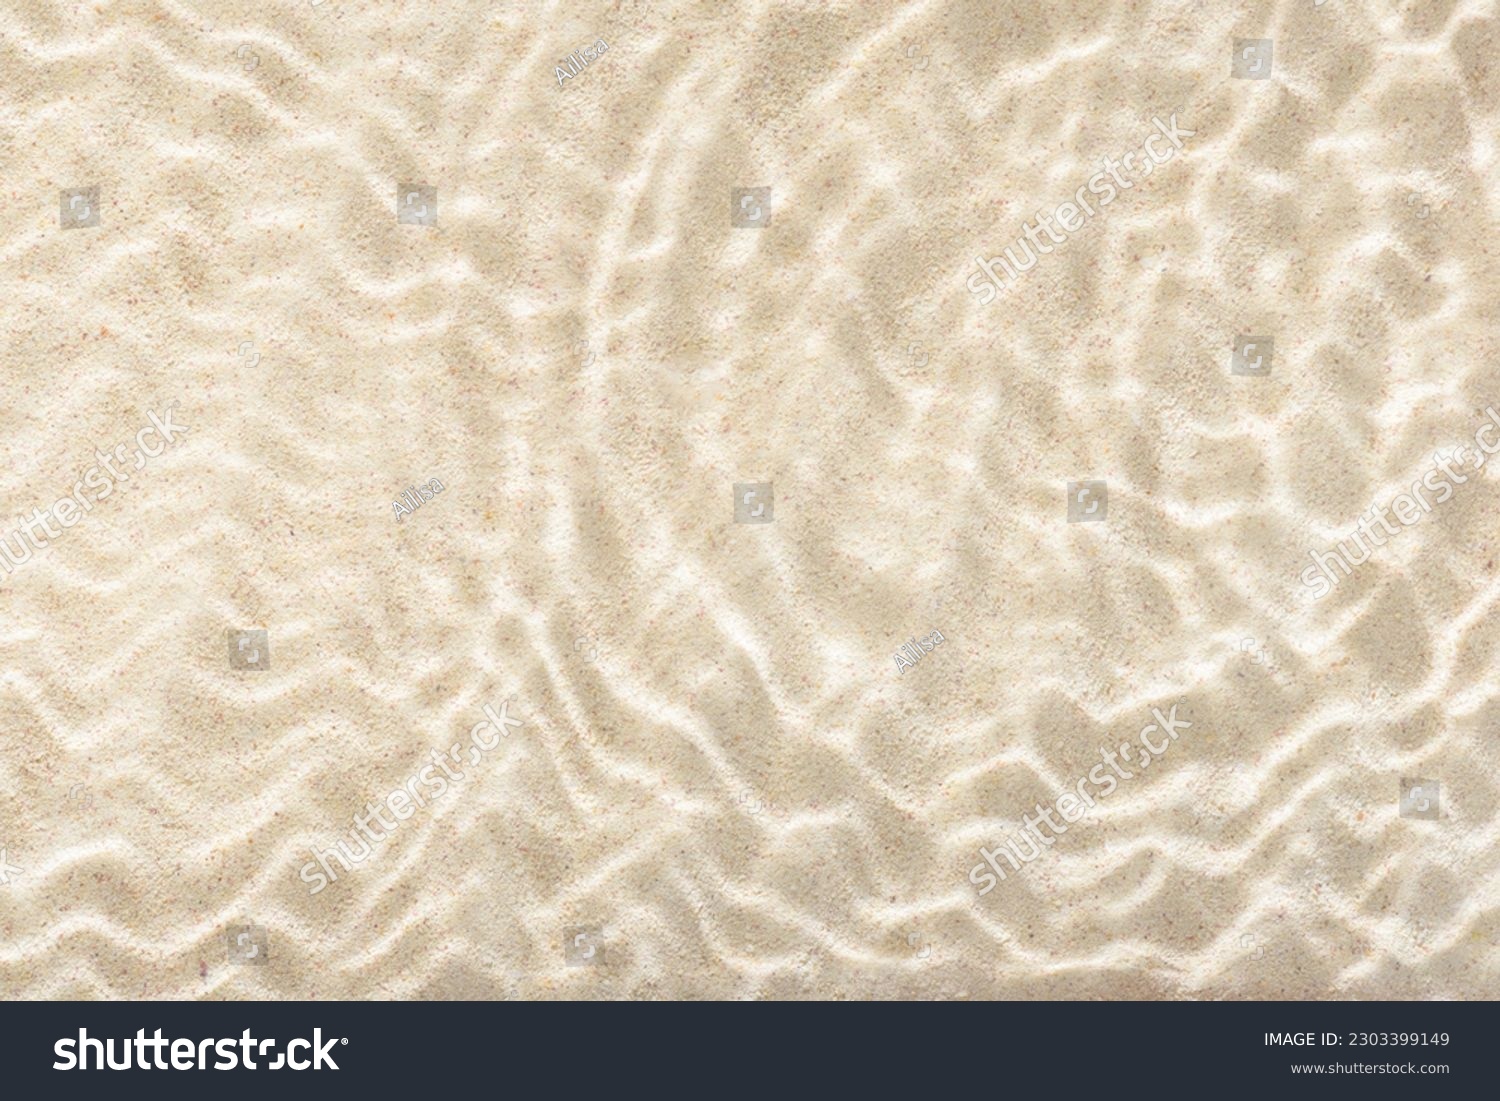 sun lights shadow in wavy water on abstract sand background, beautiful abstract spa concept banner of sea paradise island #2303399149